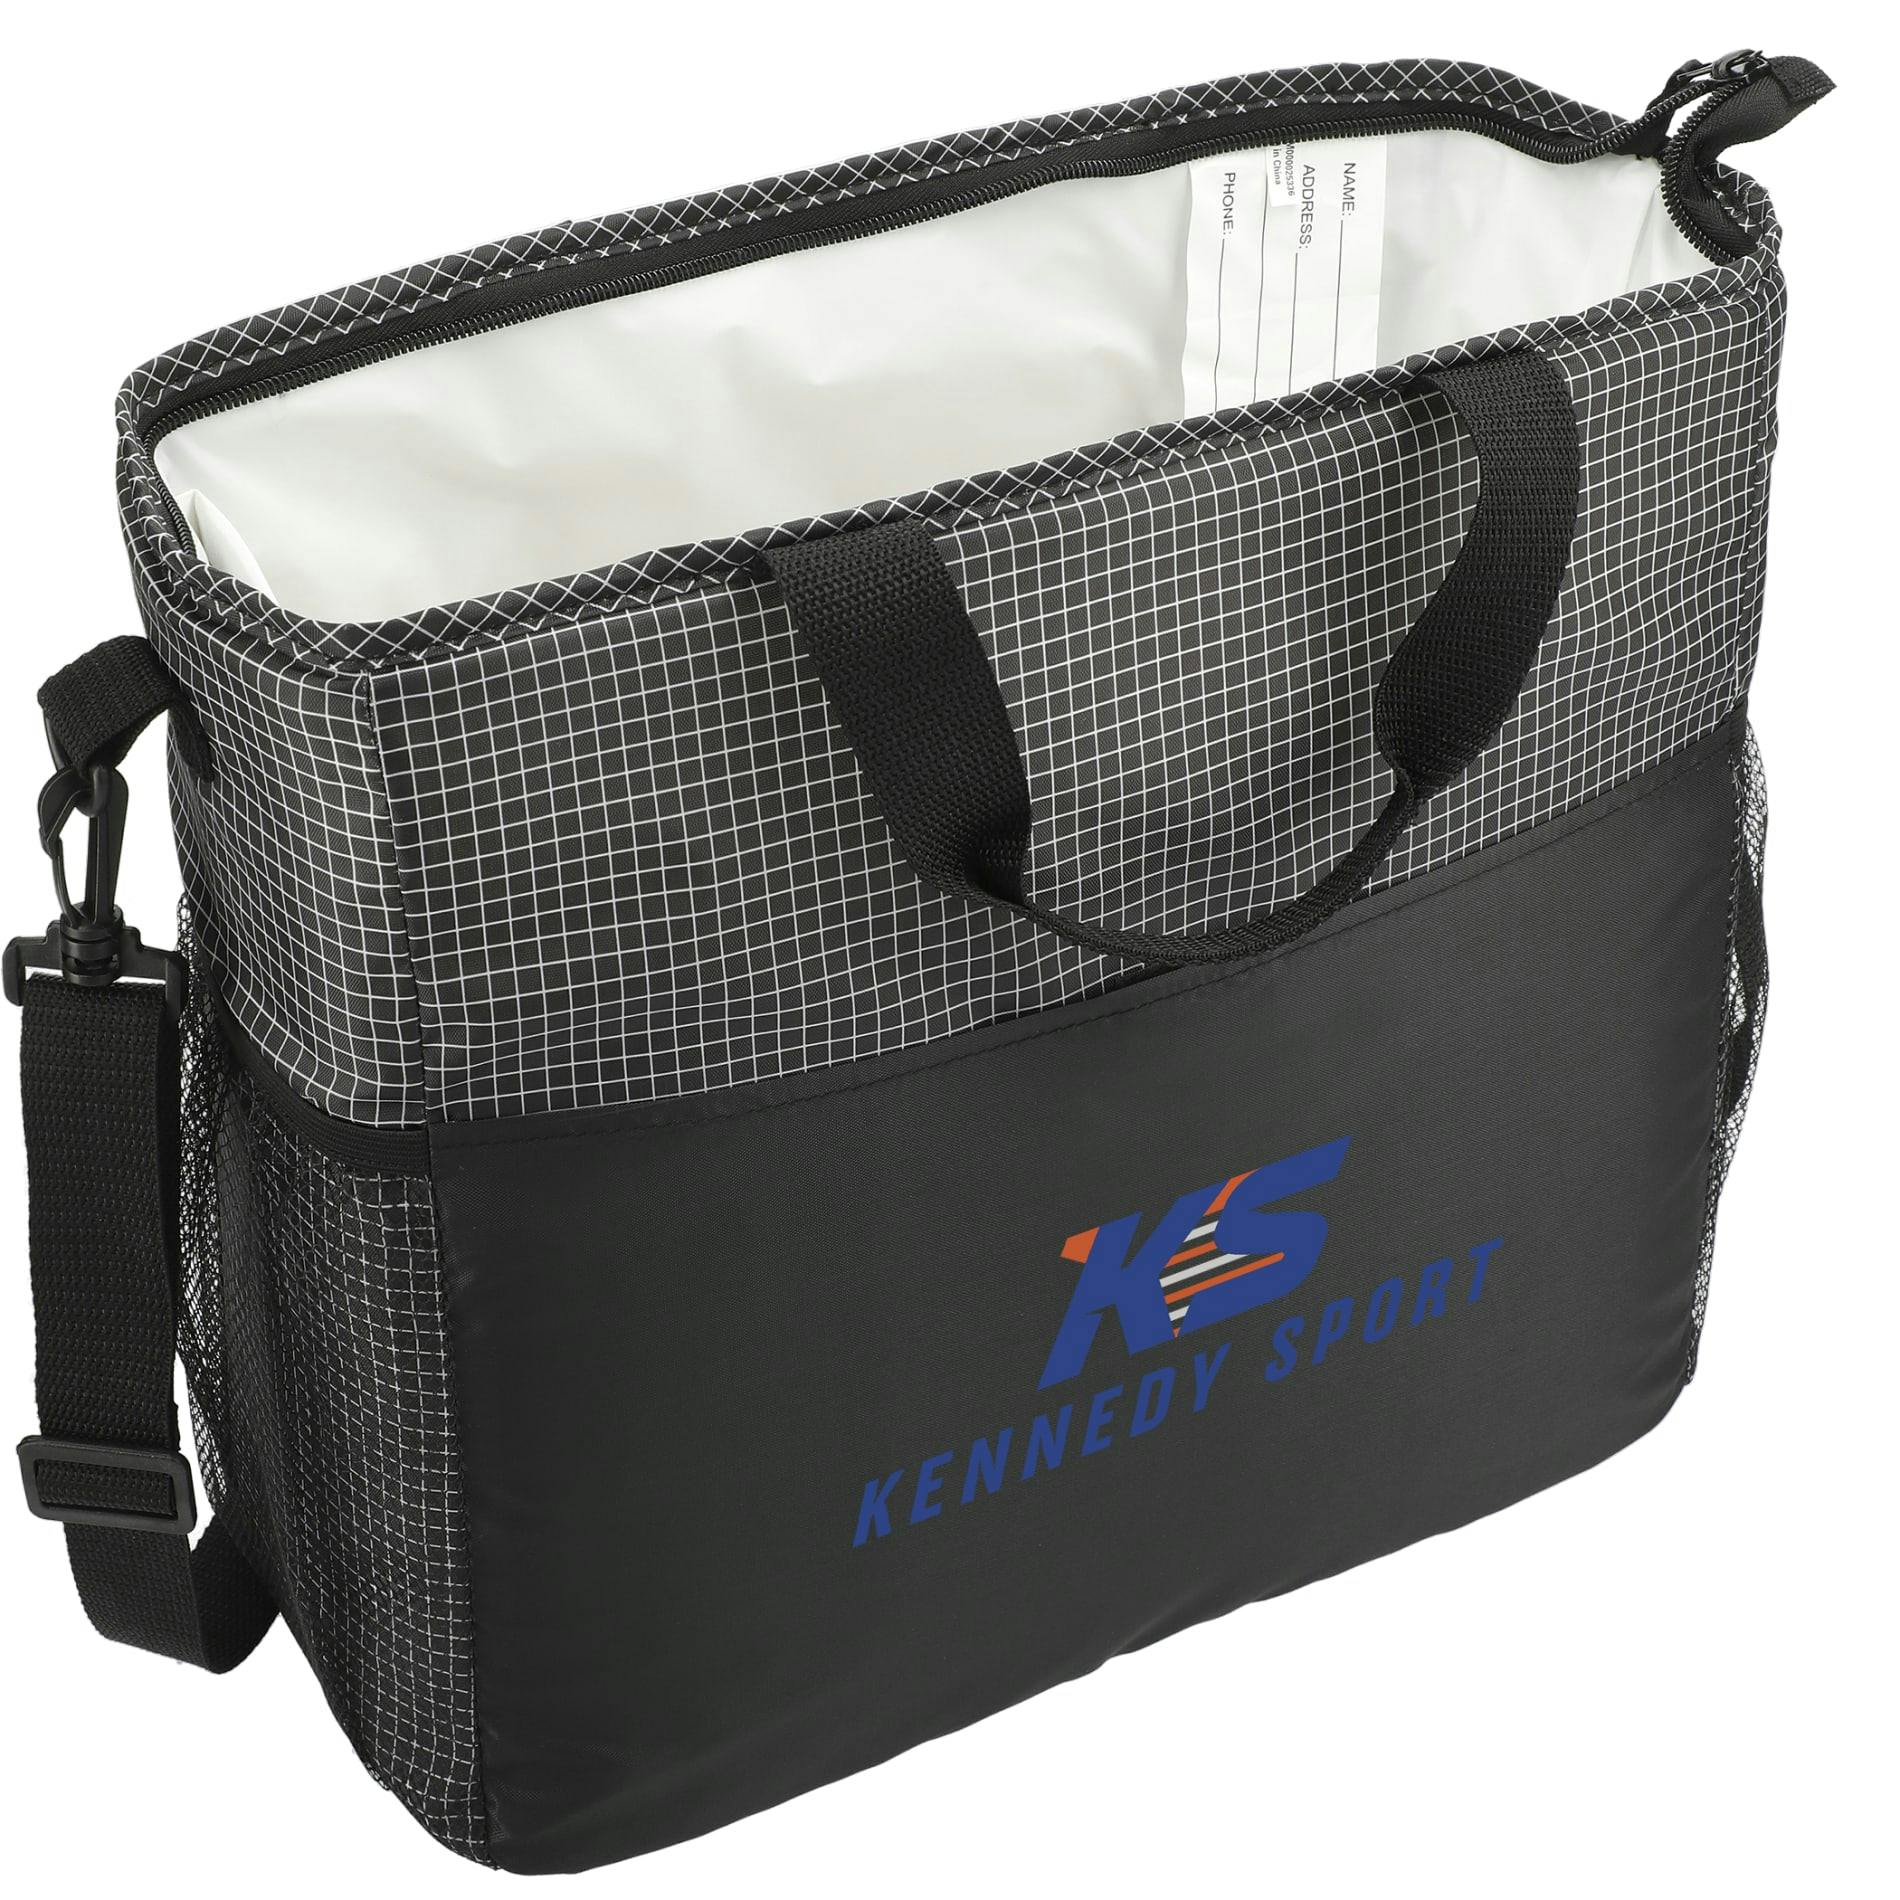 Grid Tote 24 Can Cooler - additional Image 1